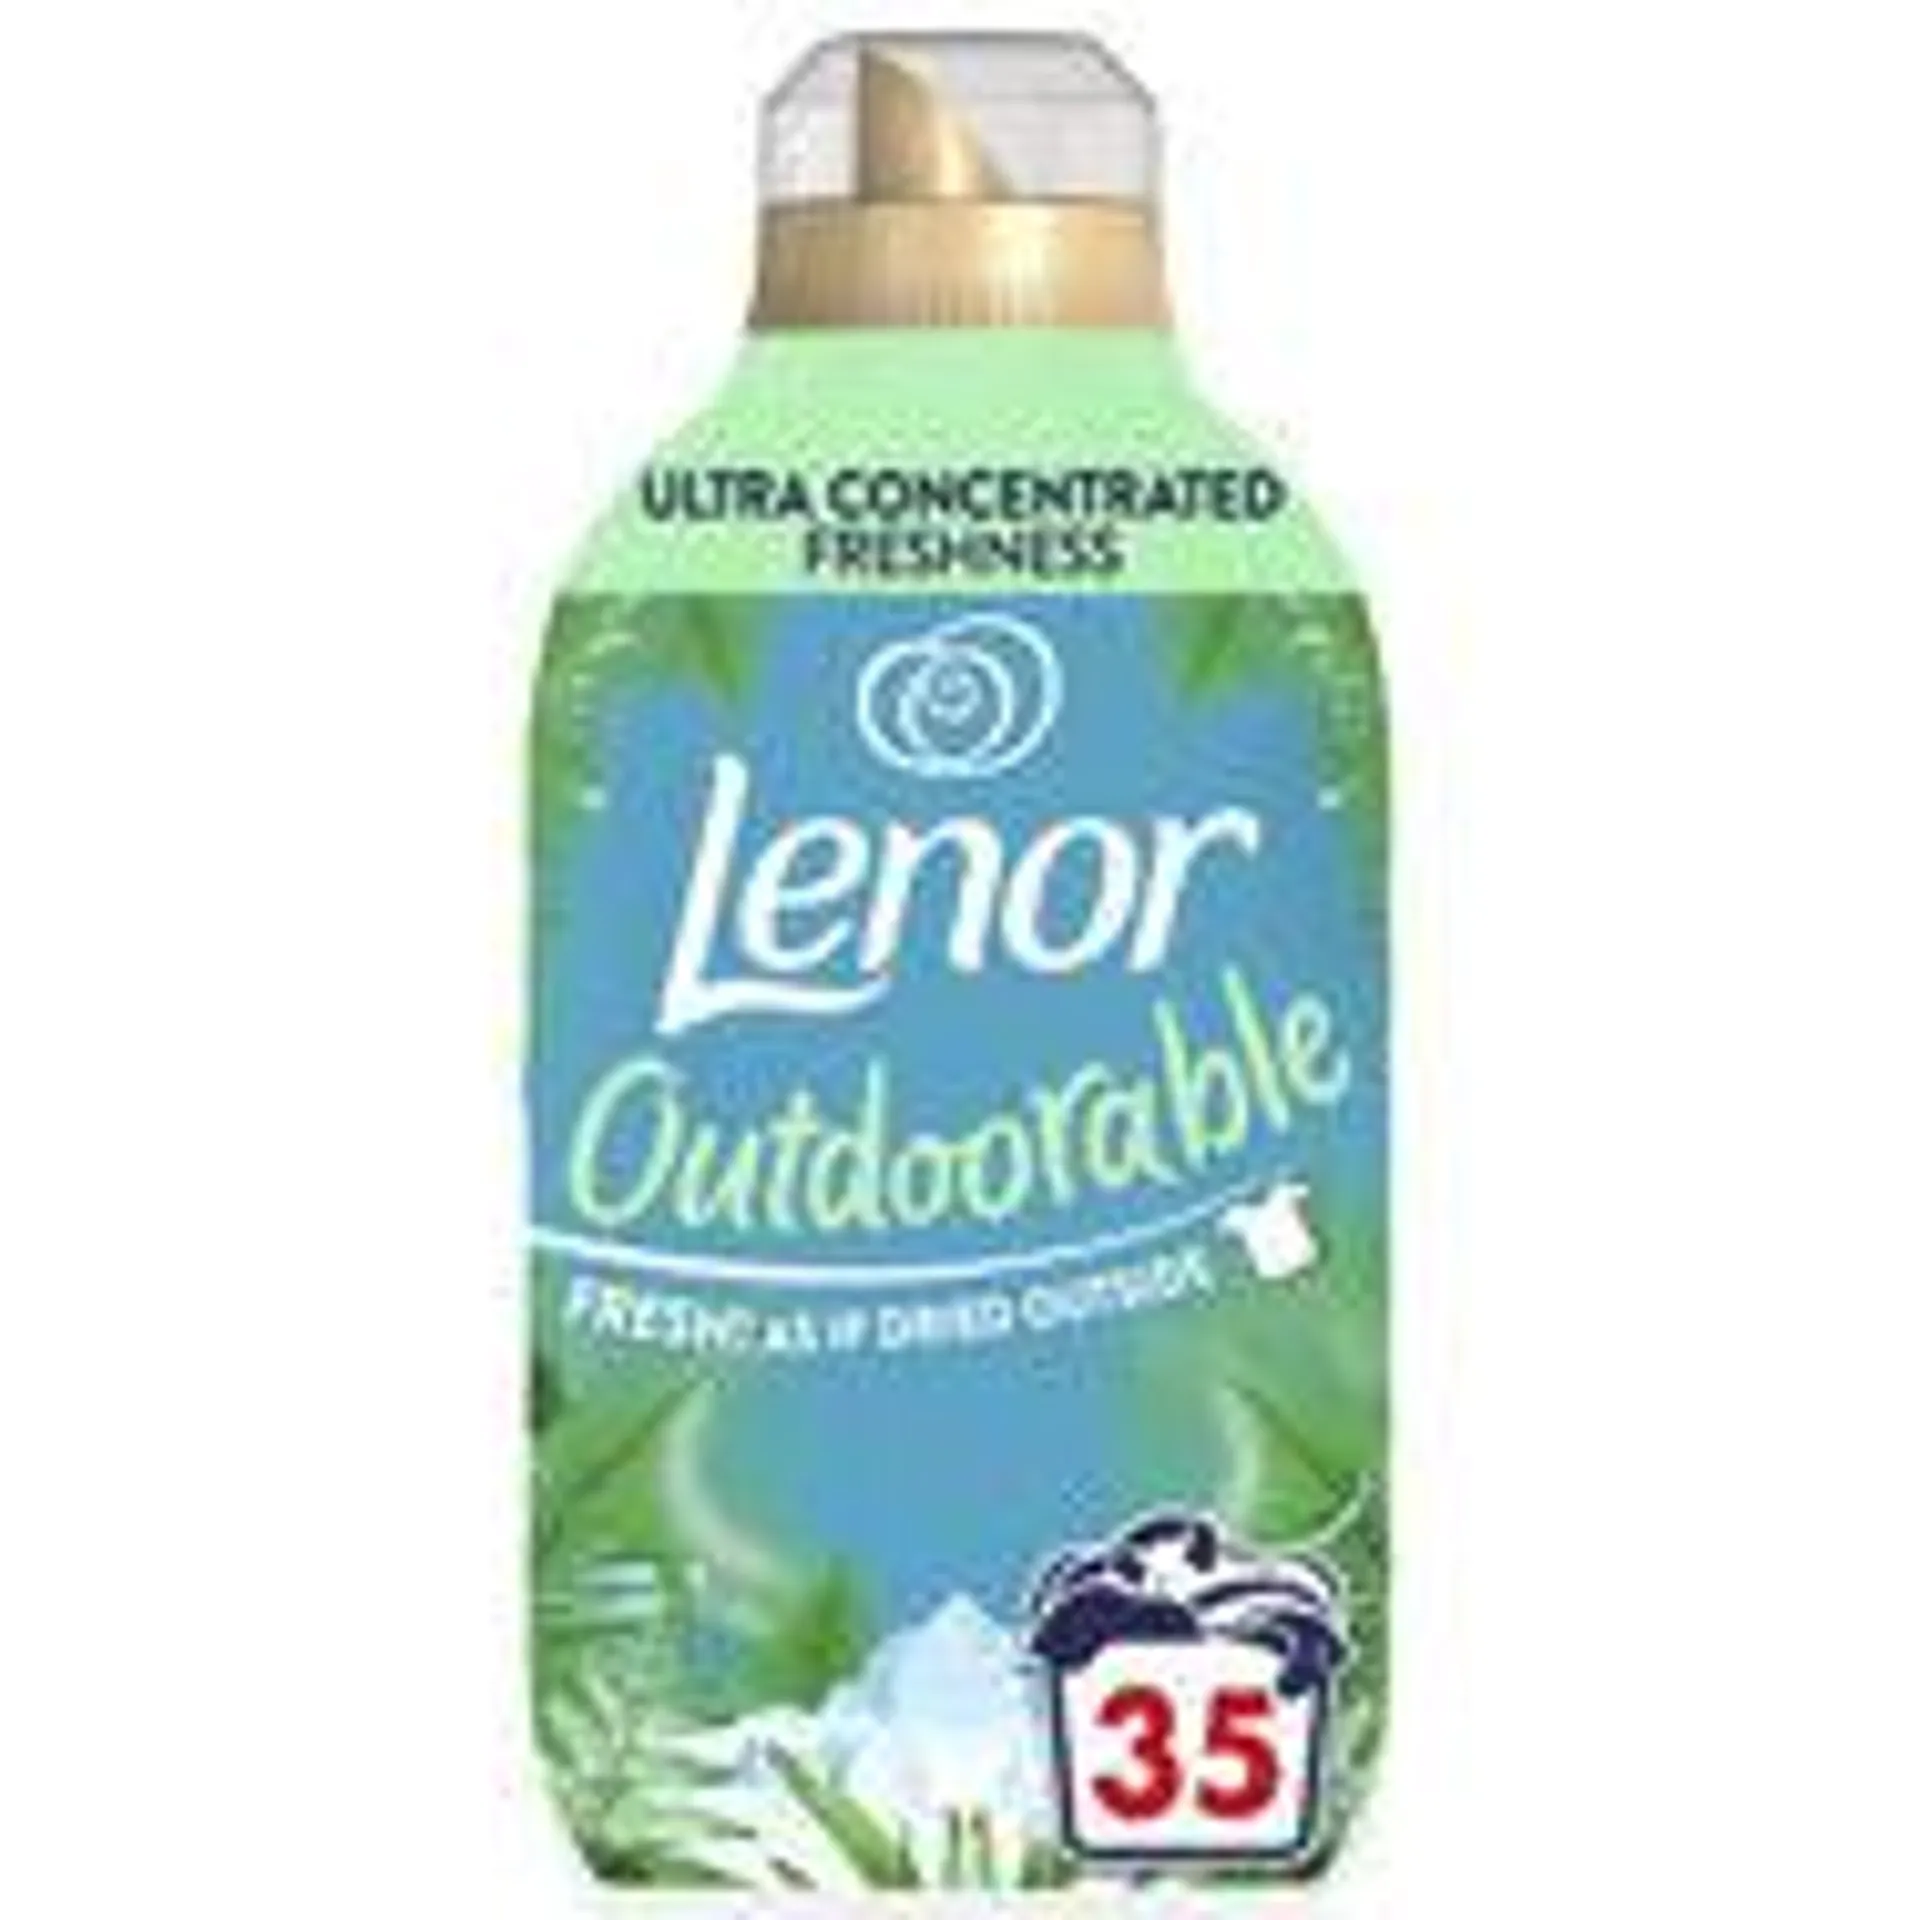 Lenor Outdoorable Fabric Conditioner 35 Washes, Northern Solstice